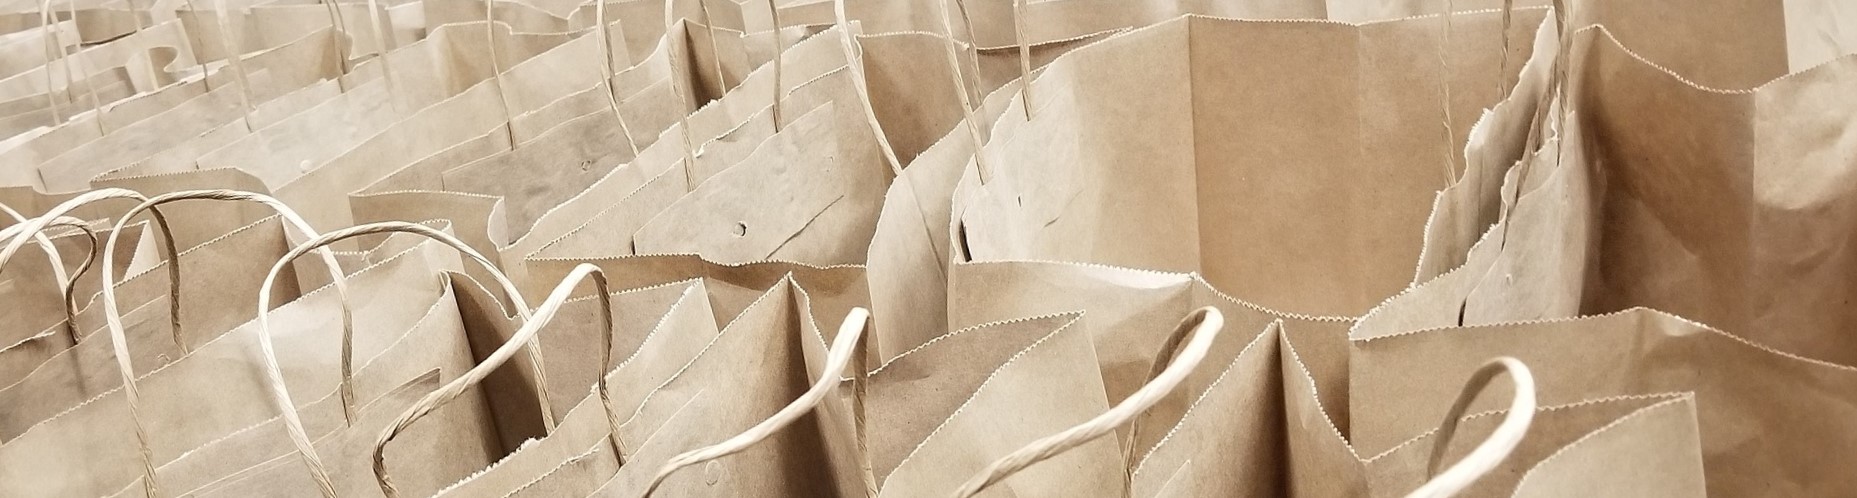 Grocery Bags | Breast Cancer Car Donations